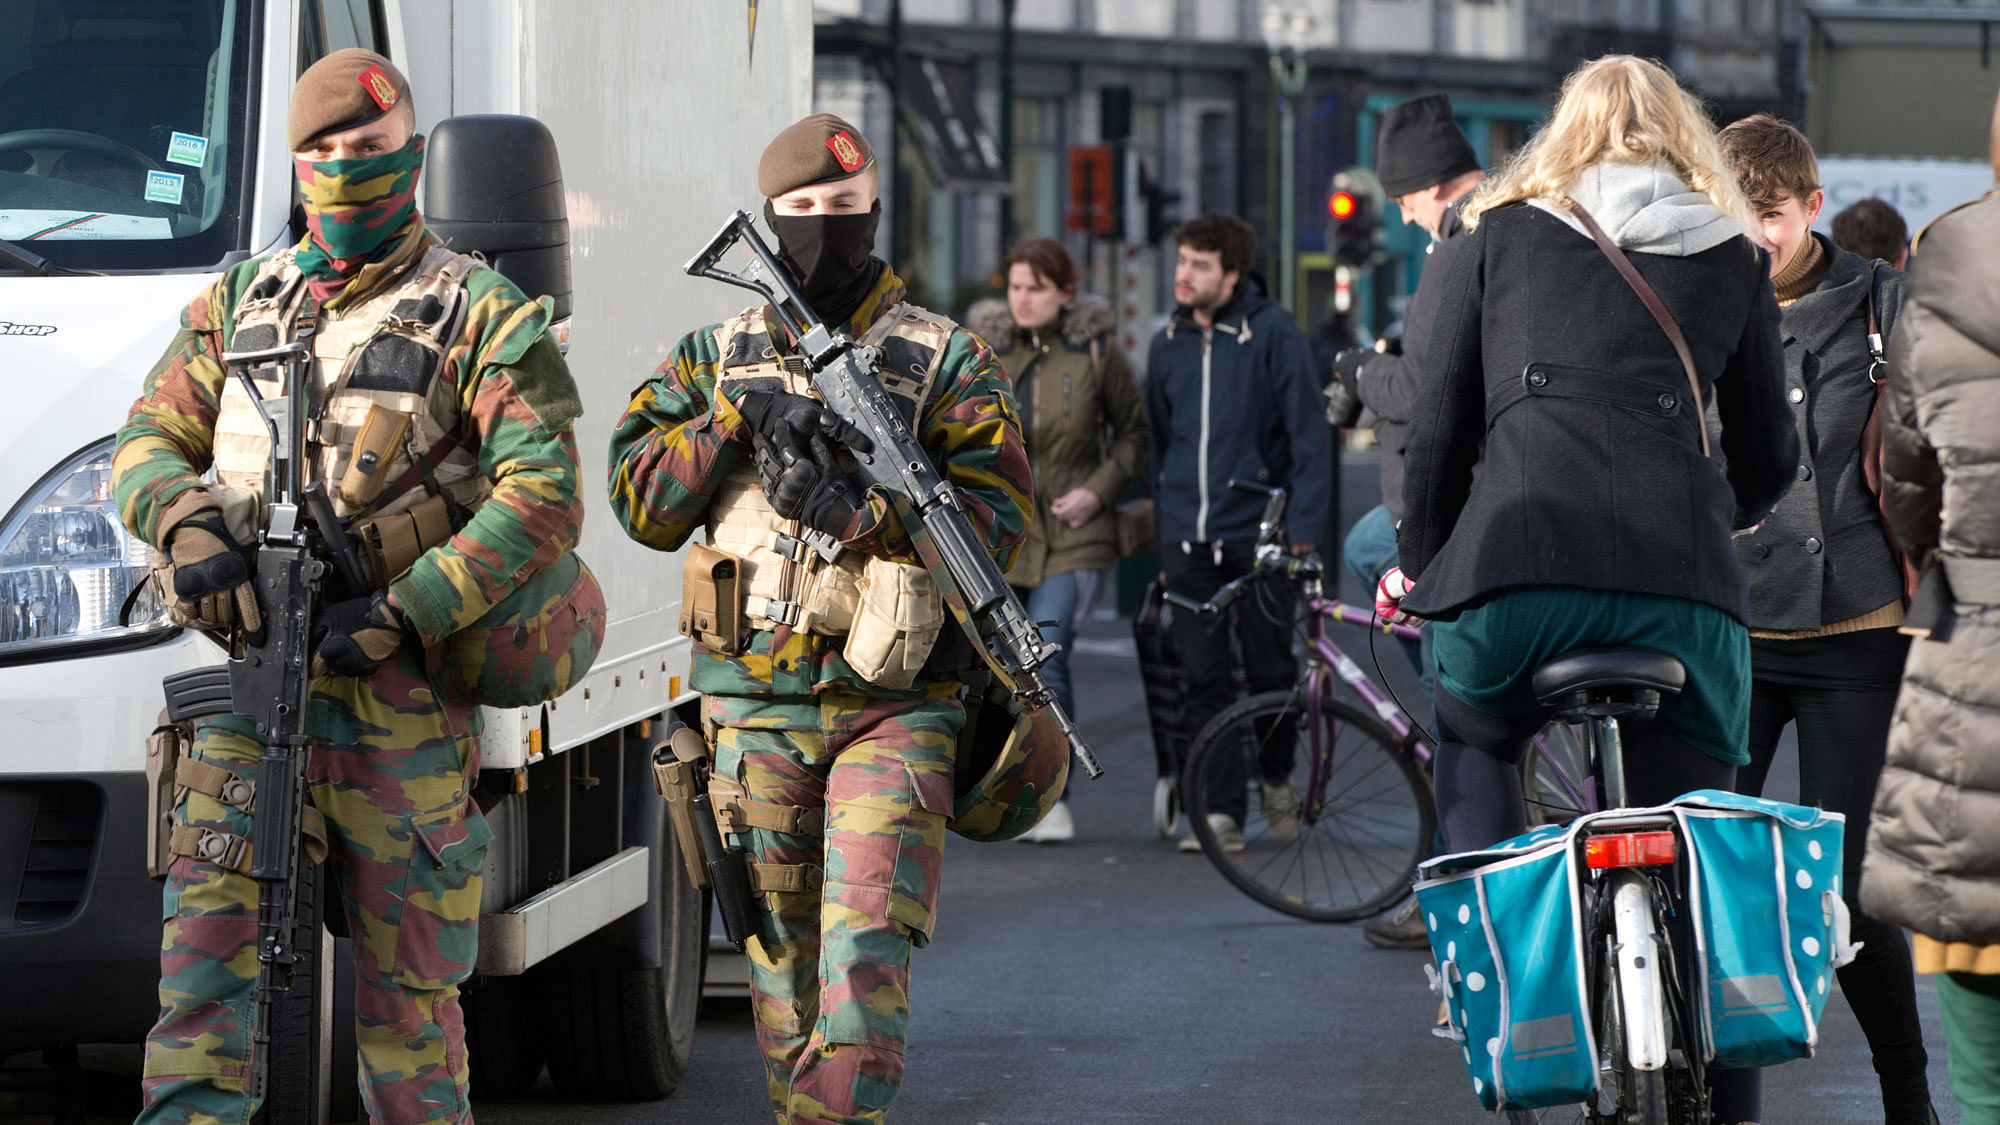 Belgian army soldiers patrols in the center of Brussels after the Tuesday attack. (Photo: AP)